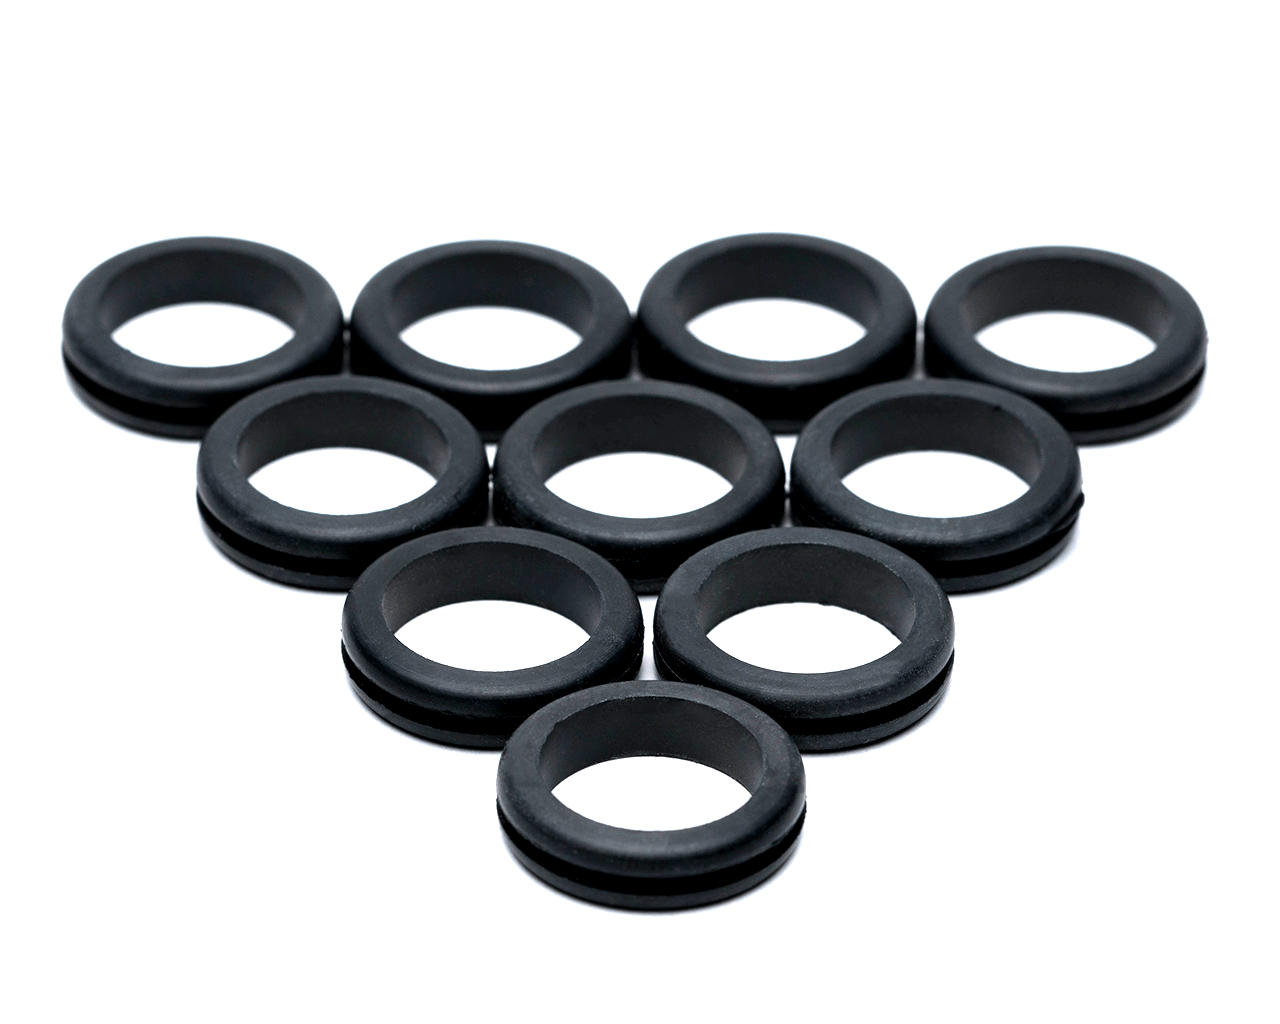 PrimoChill 5/8 Inch Cable / Tubing Rubber Pass Thru Grommet - 10 Pack - PrimoChill - KEEPING IT COOL